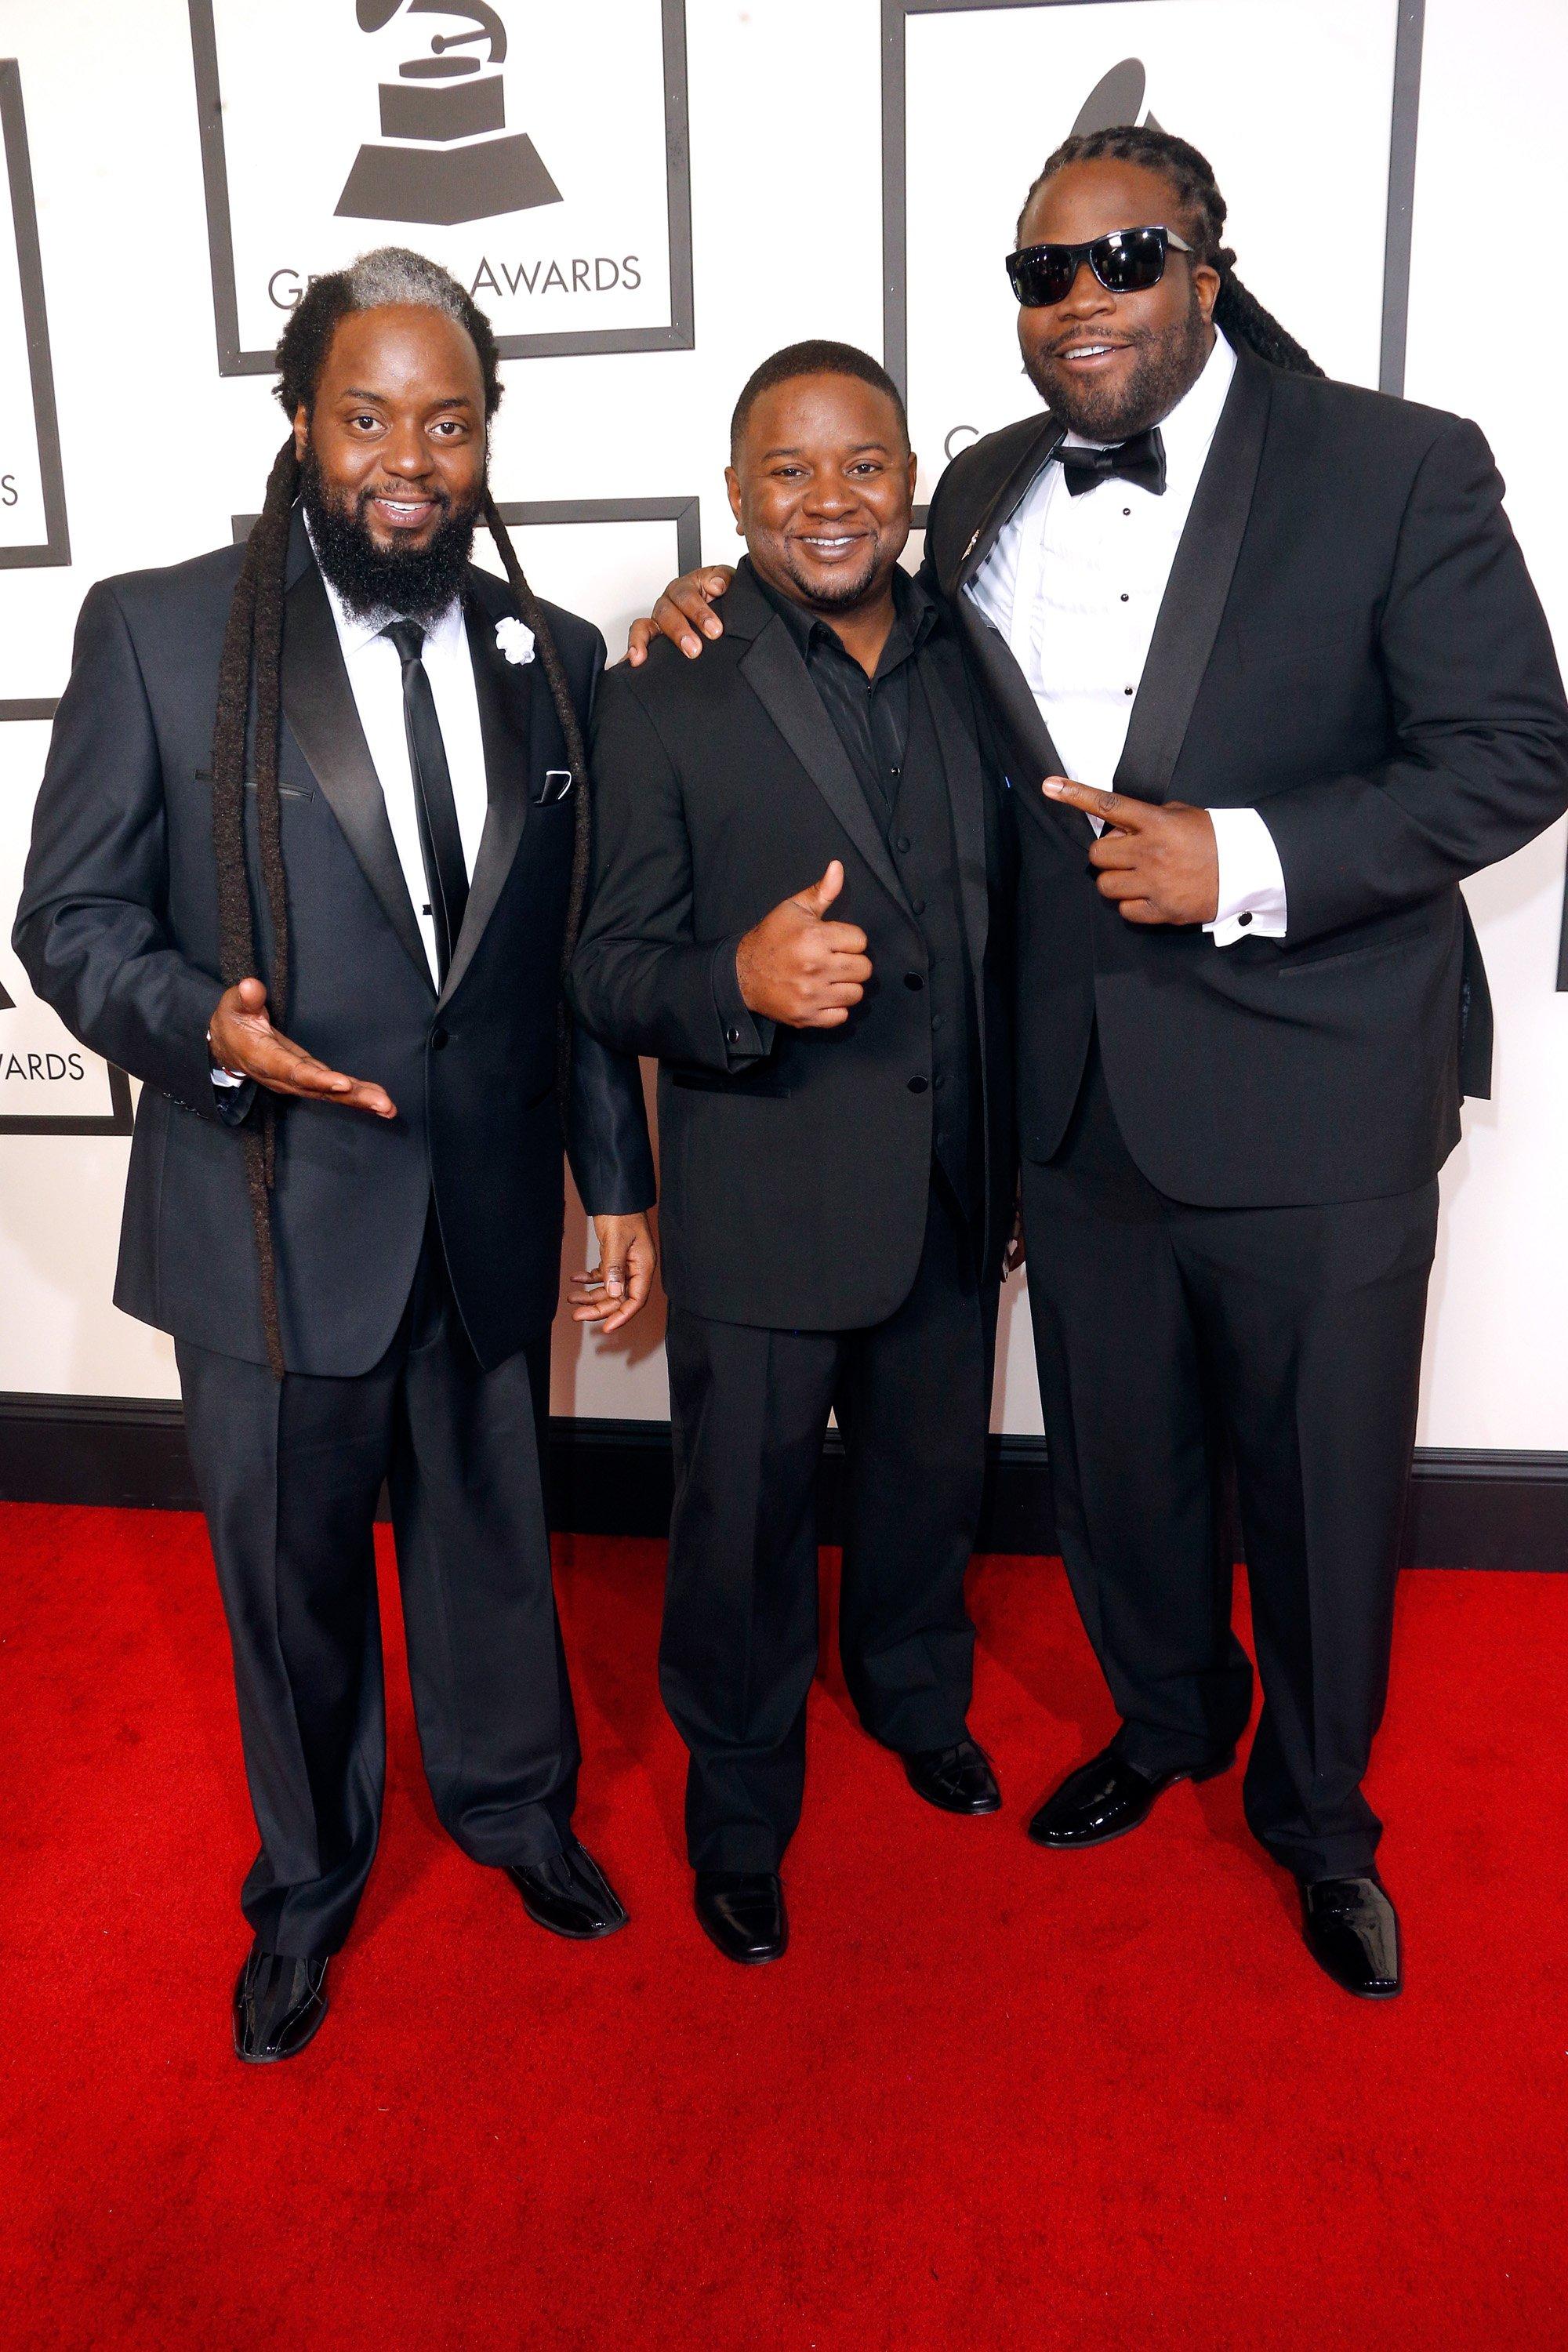 Morgan Heritage on the GRAMMYs red carpet